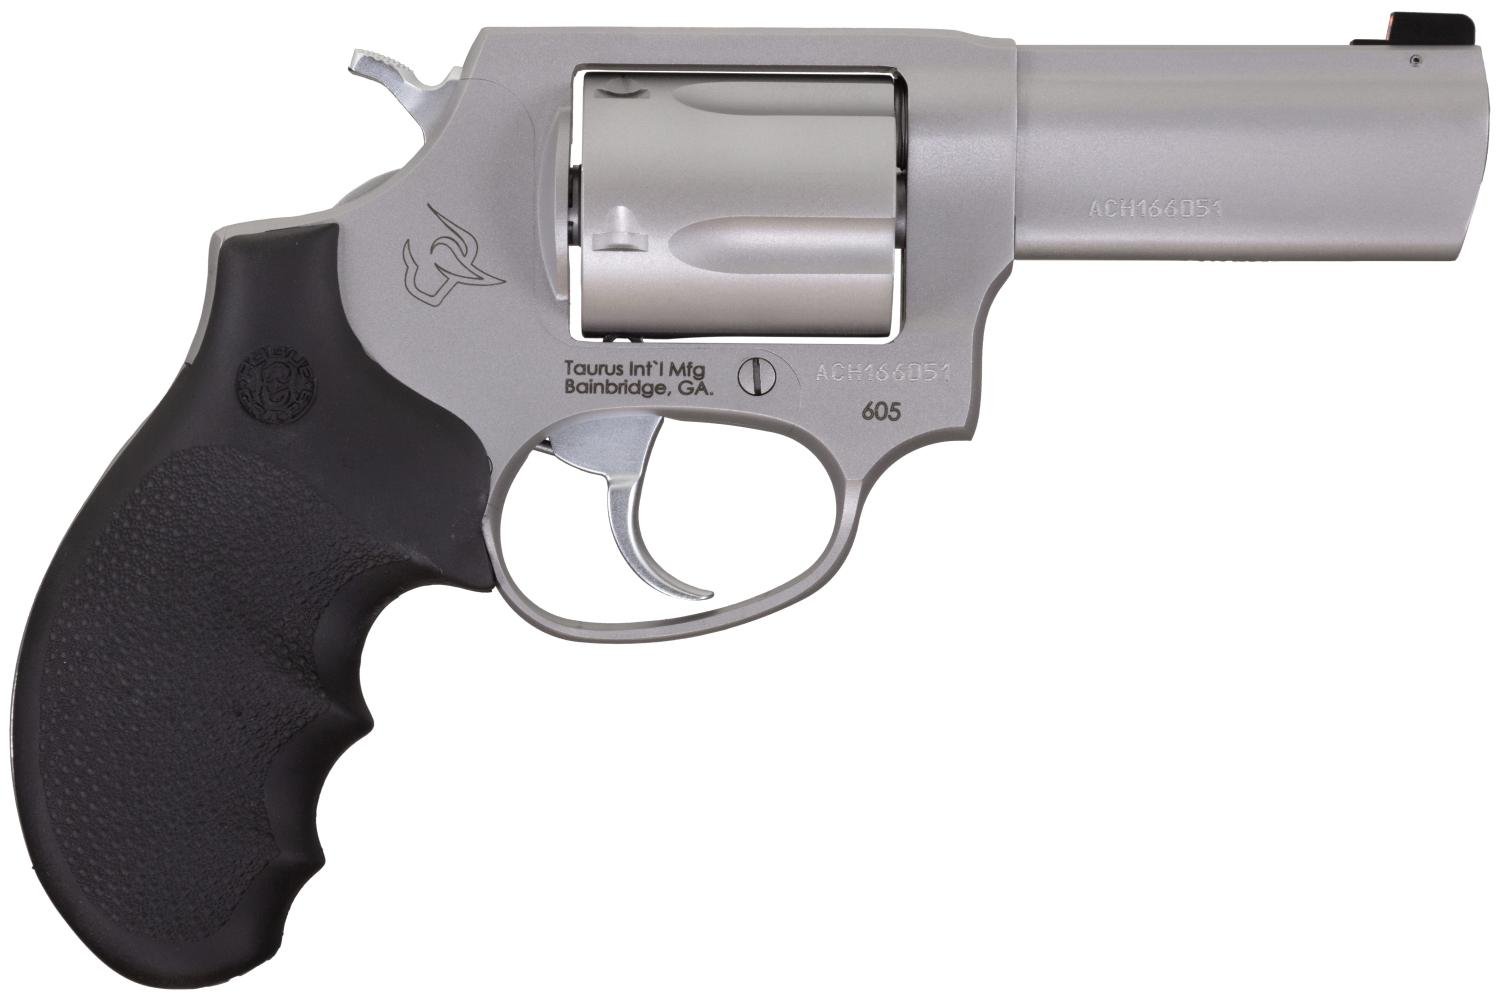 Taurus Defender 605 Stainless .357 Mag 3" Barrel 5-Rounds Front Night Sight - $371.99 ($9.99 S/H on Firearms)